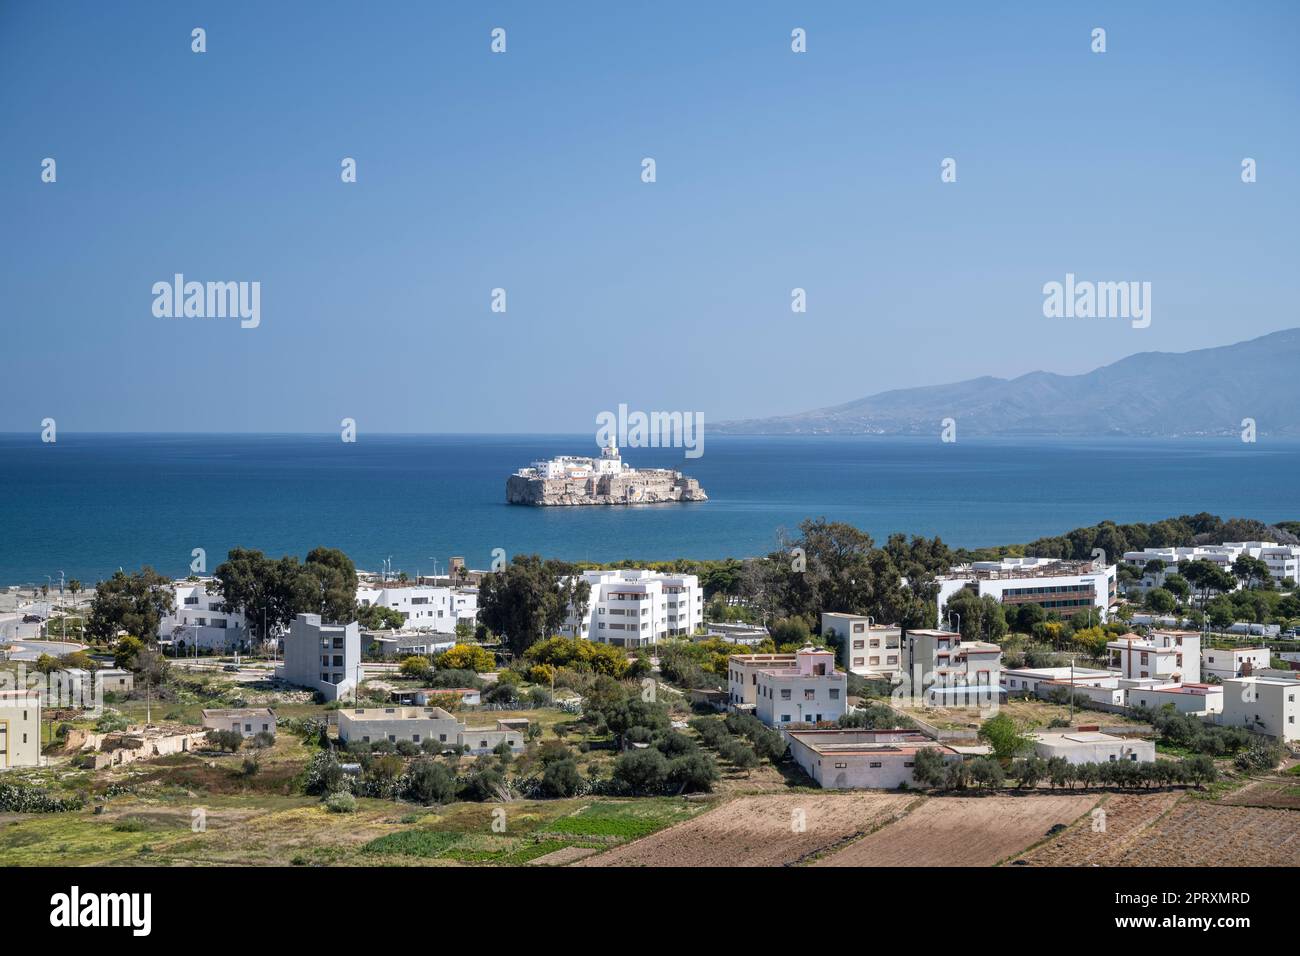 Rock of Al Hoceima seen from above. The island is Spanish territory off the coast of Morocco. Stock Photo